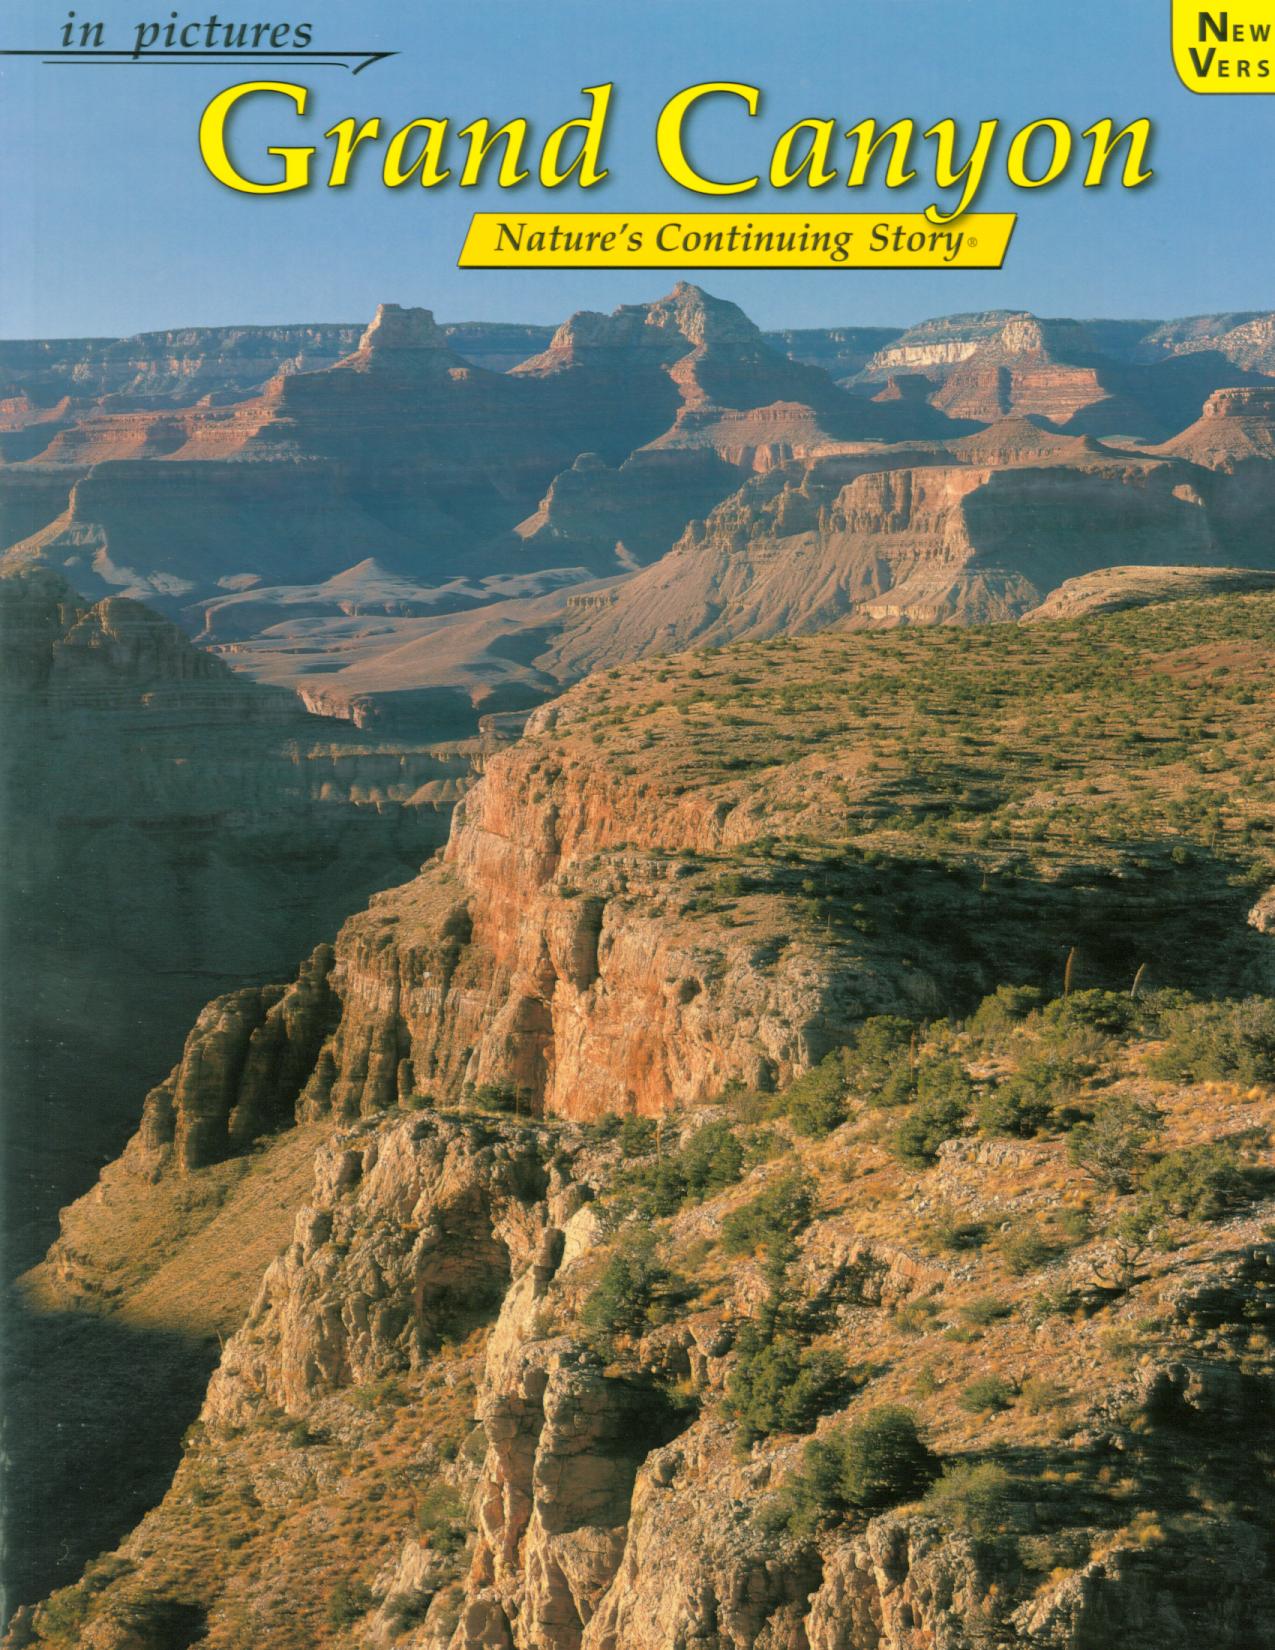 GRAND CANYON IN PICTURES: nature's continuing story (AZ). 